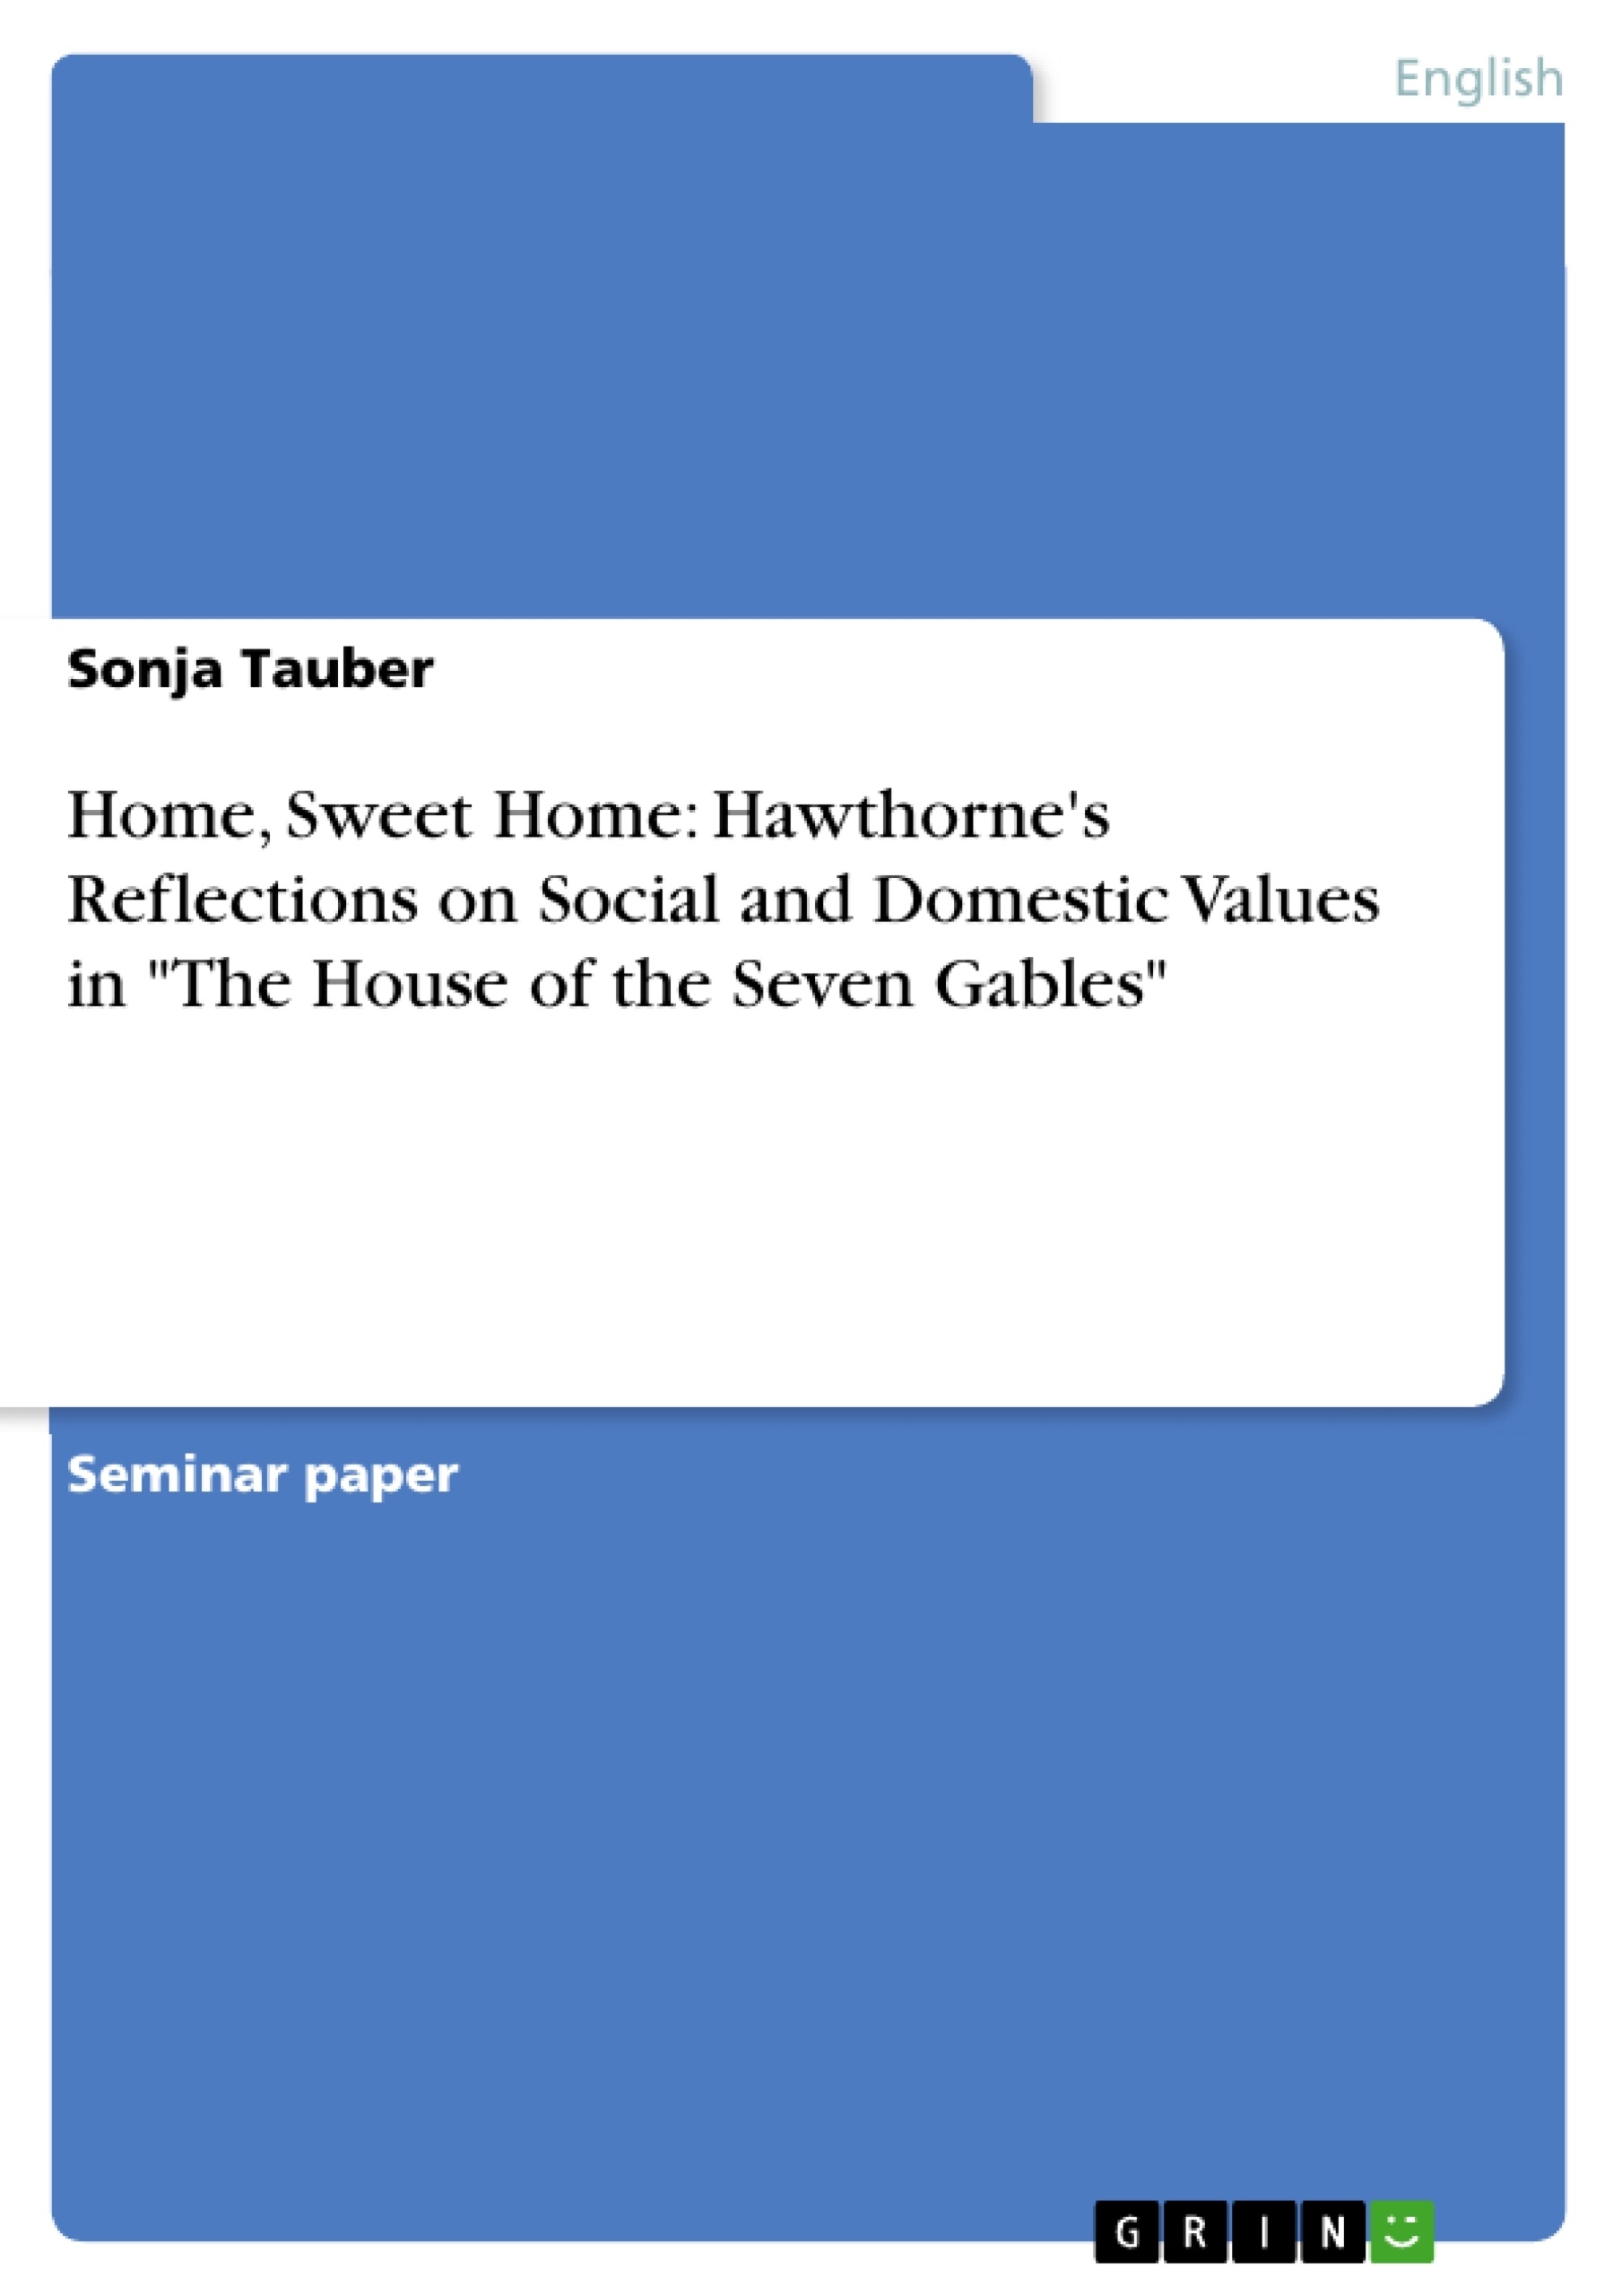 Titre: Home, Sweet Home: Hawthorne's Reflections on Social and Domestic Values in "The House of the Seven Gables"